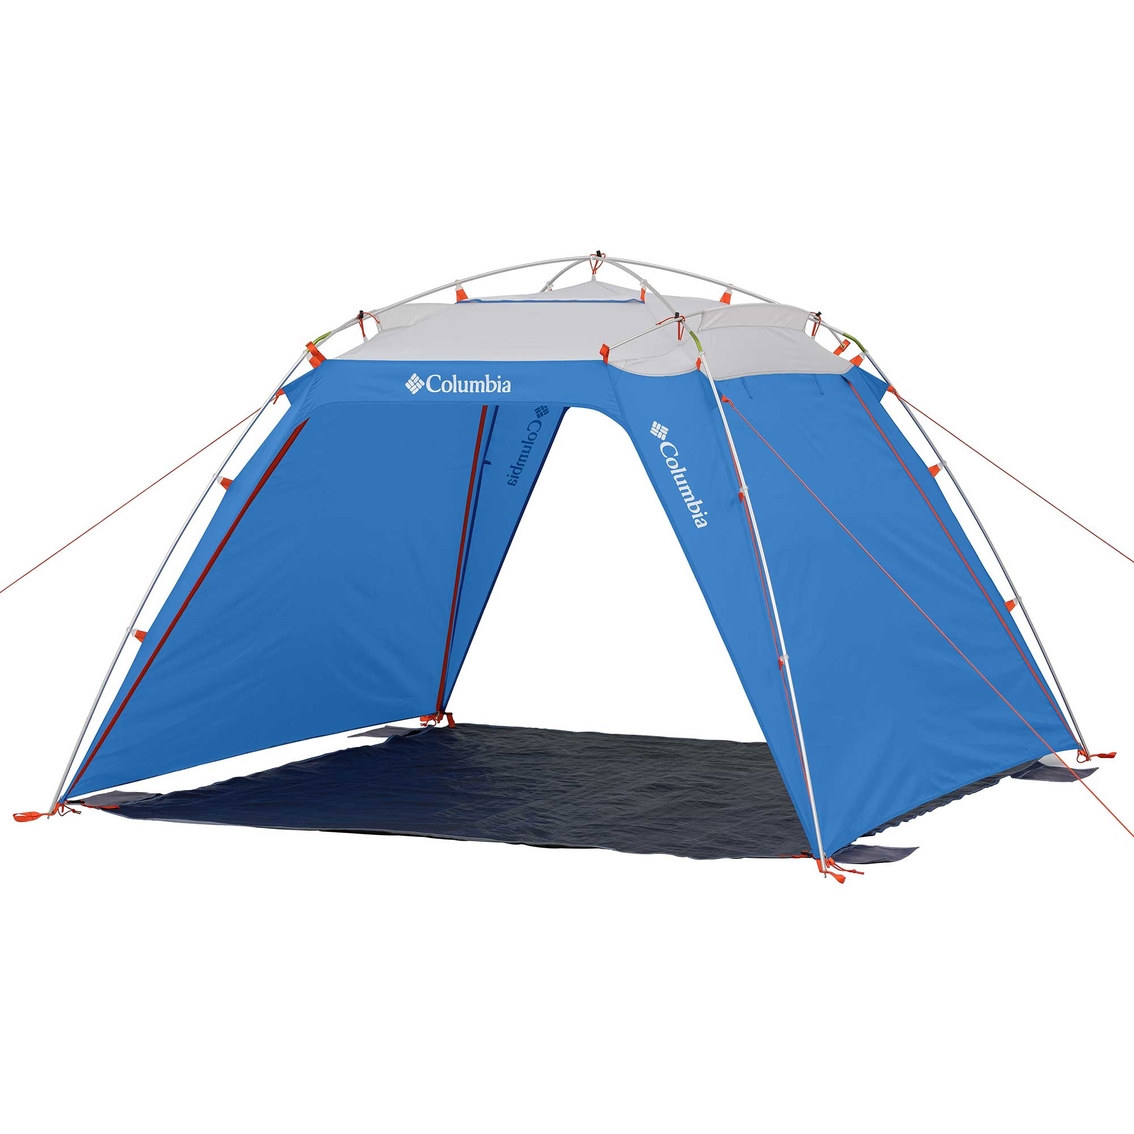 Columbia 8 x 8 ft. Sport Shade - Image 2 of 10